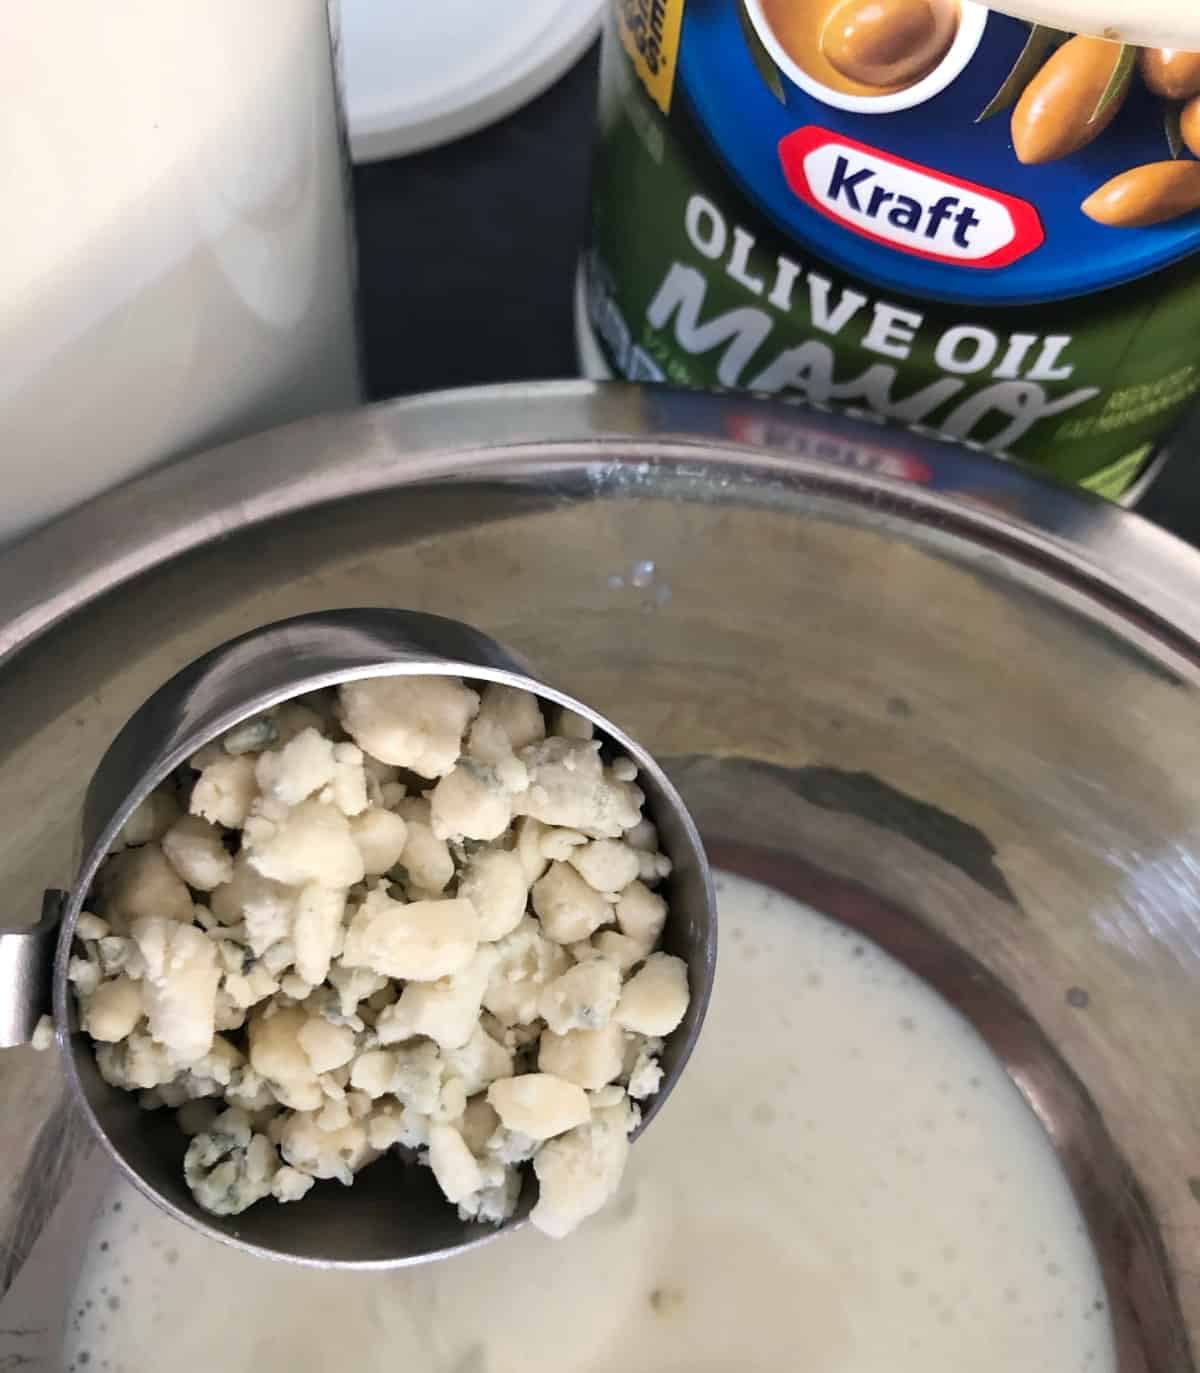 Adding crumbled blue cheese to homemade dressing in mixing bowl.